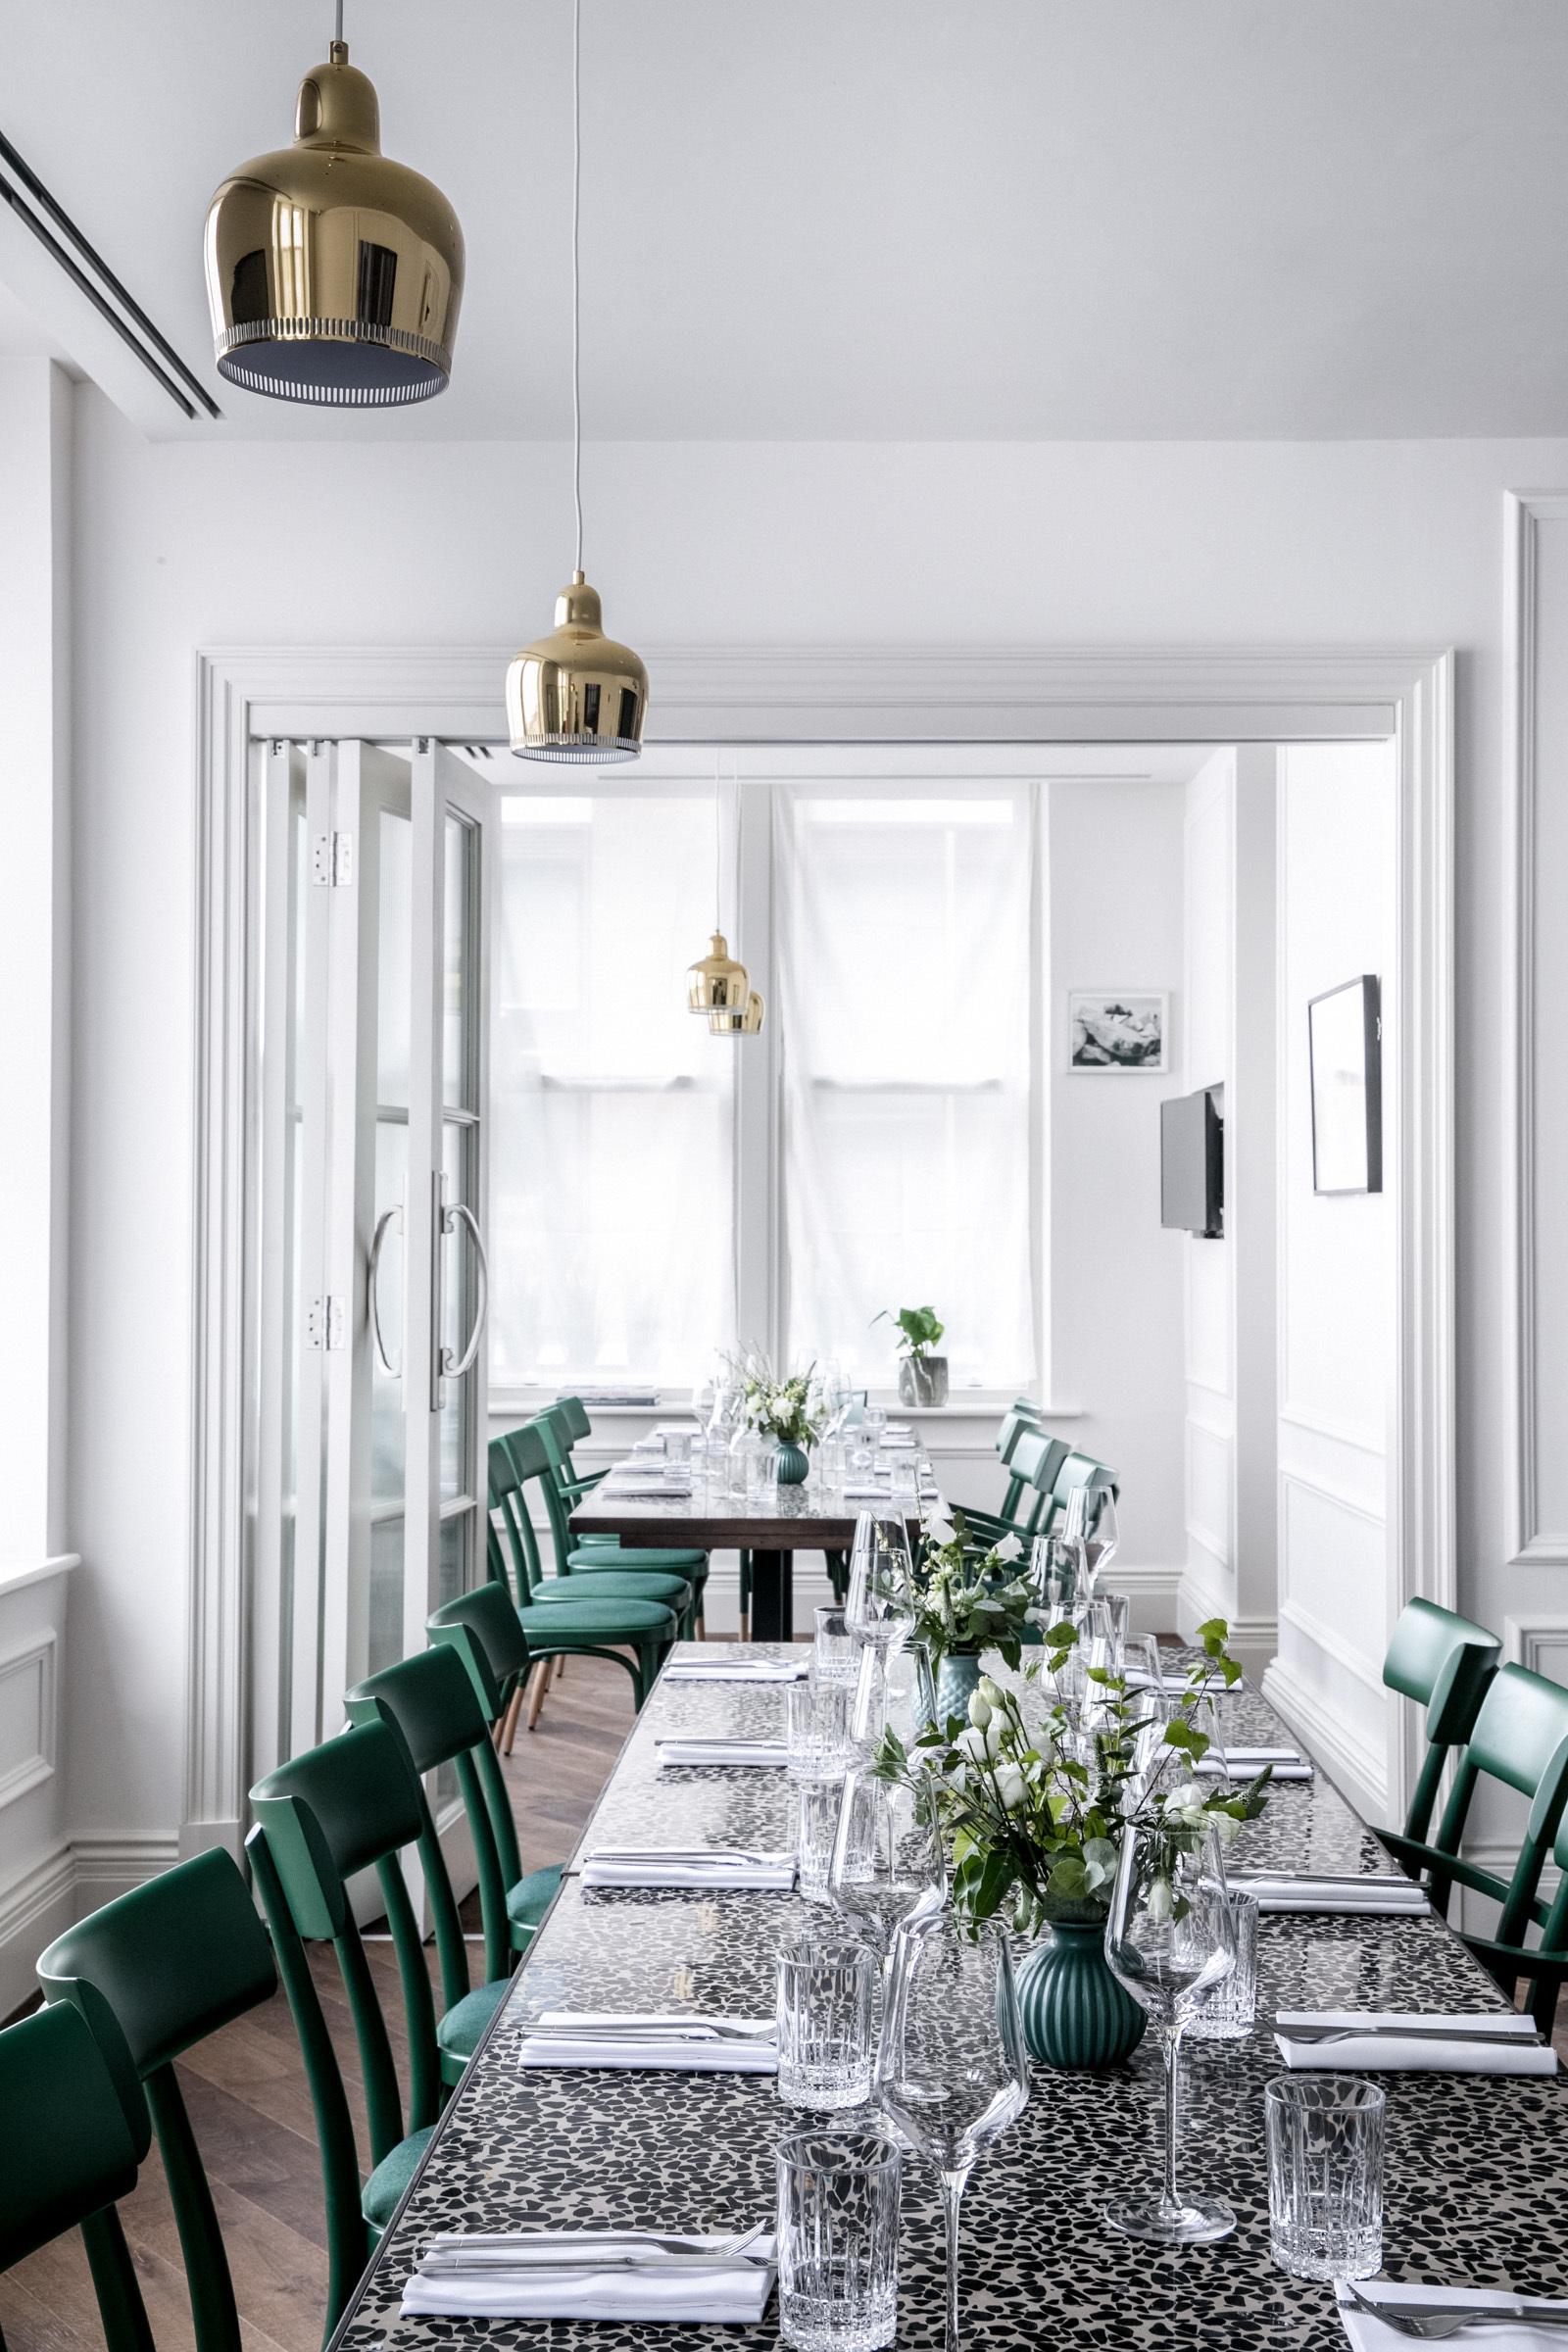  Private Dining Rooms, Allbright Mayfair photo #1